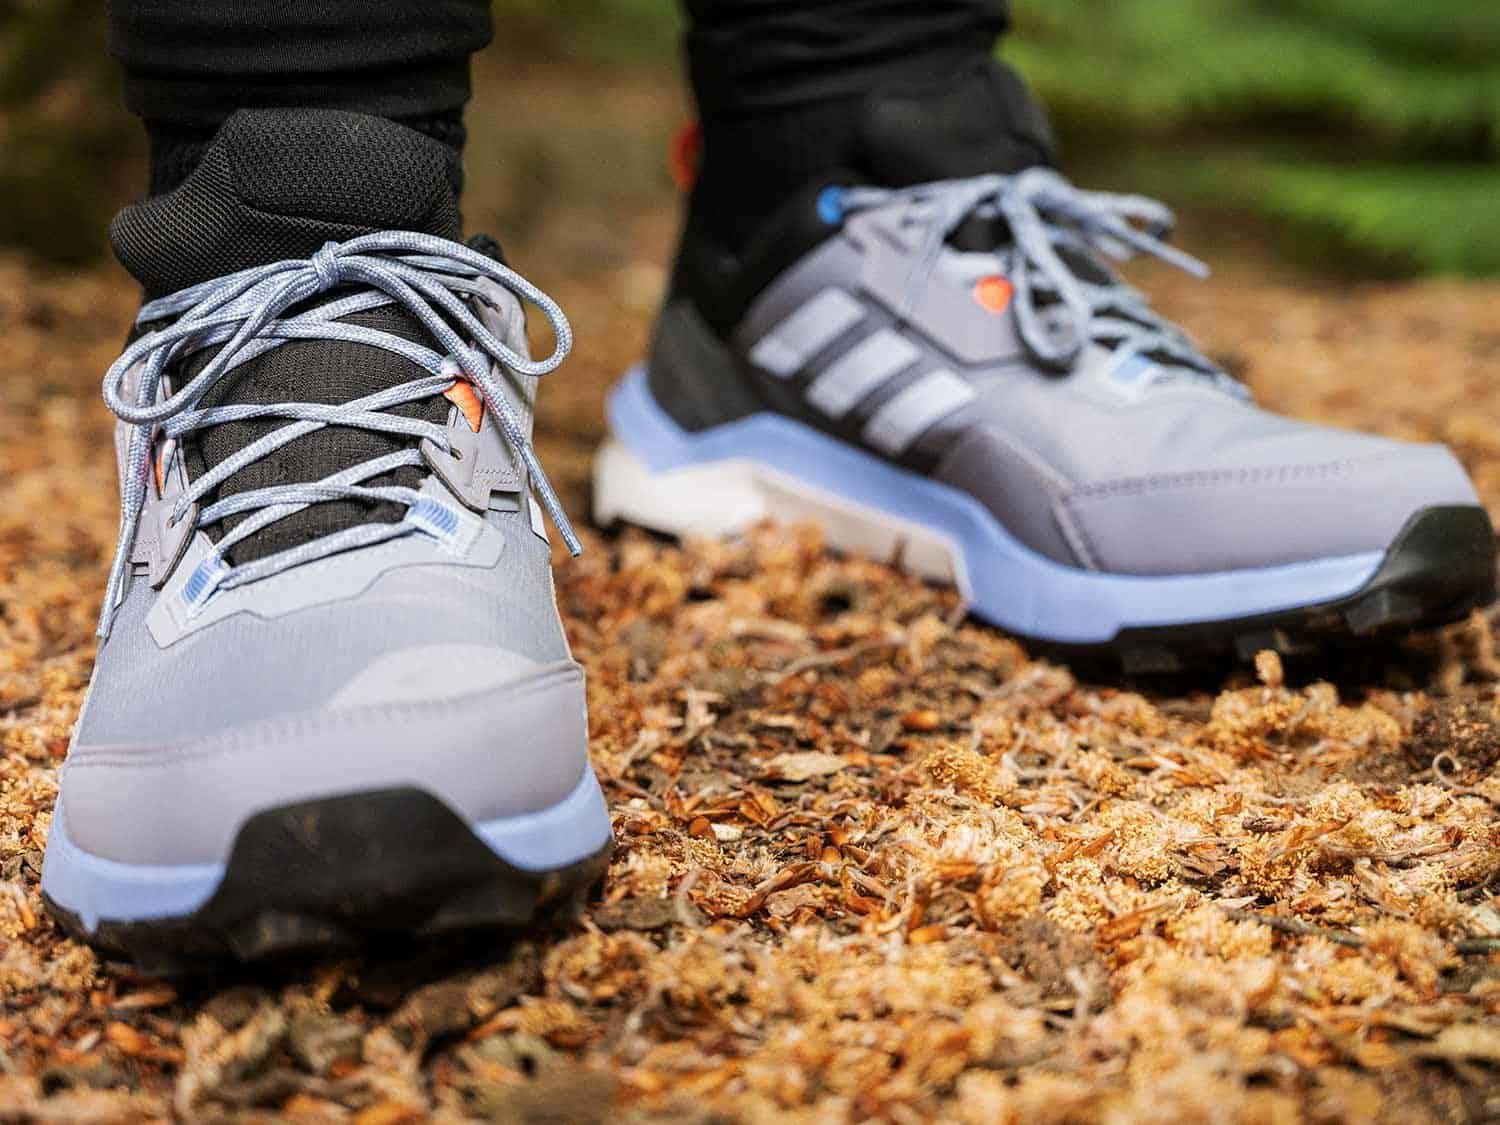 Adidas Terrex AX4 Gore-Tex Hiking Shoes Review - This Expansive Adventure